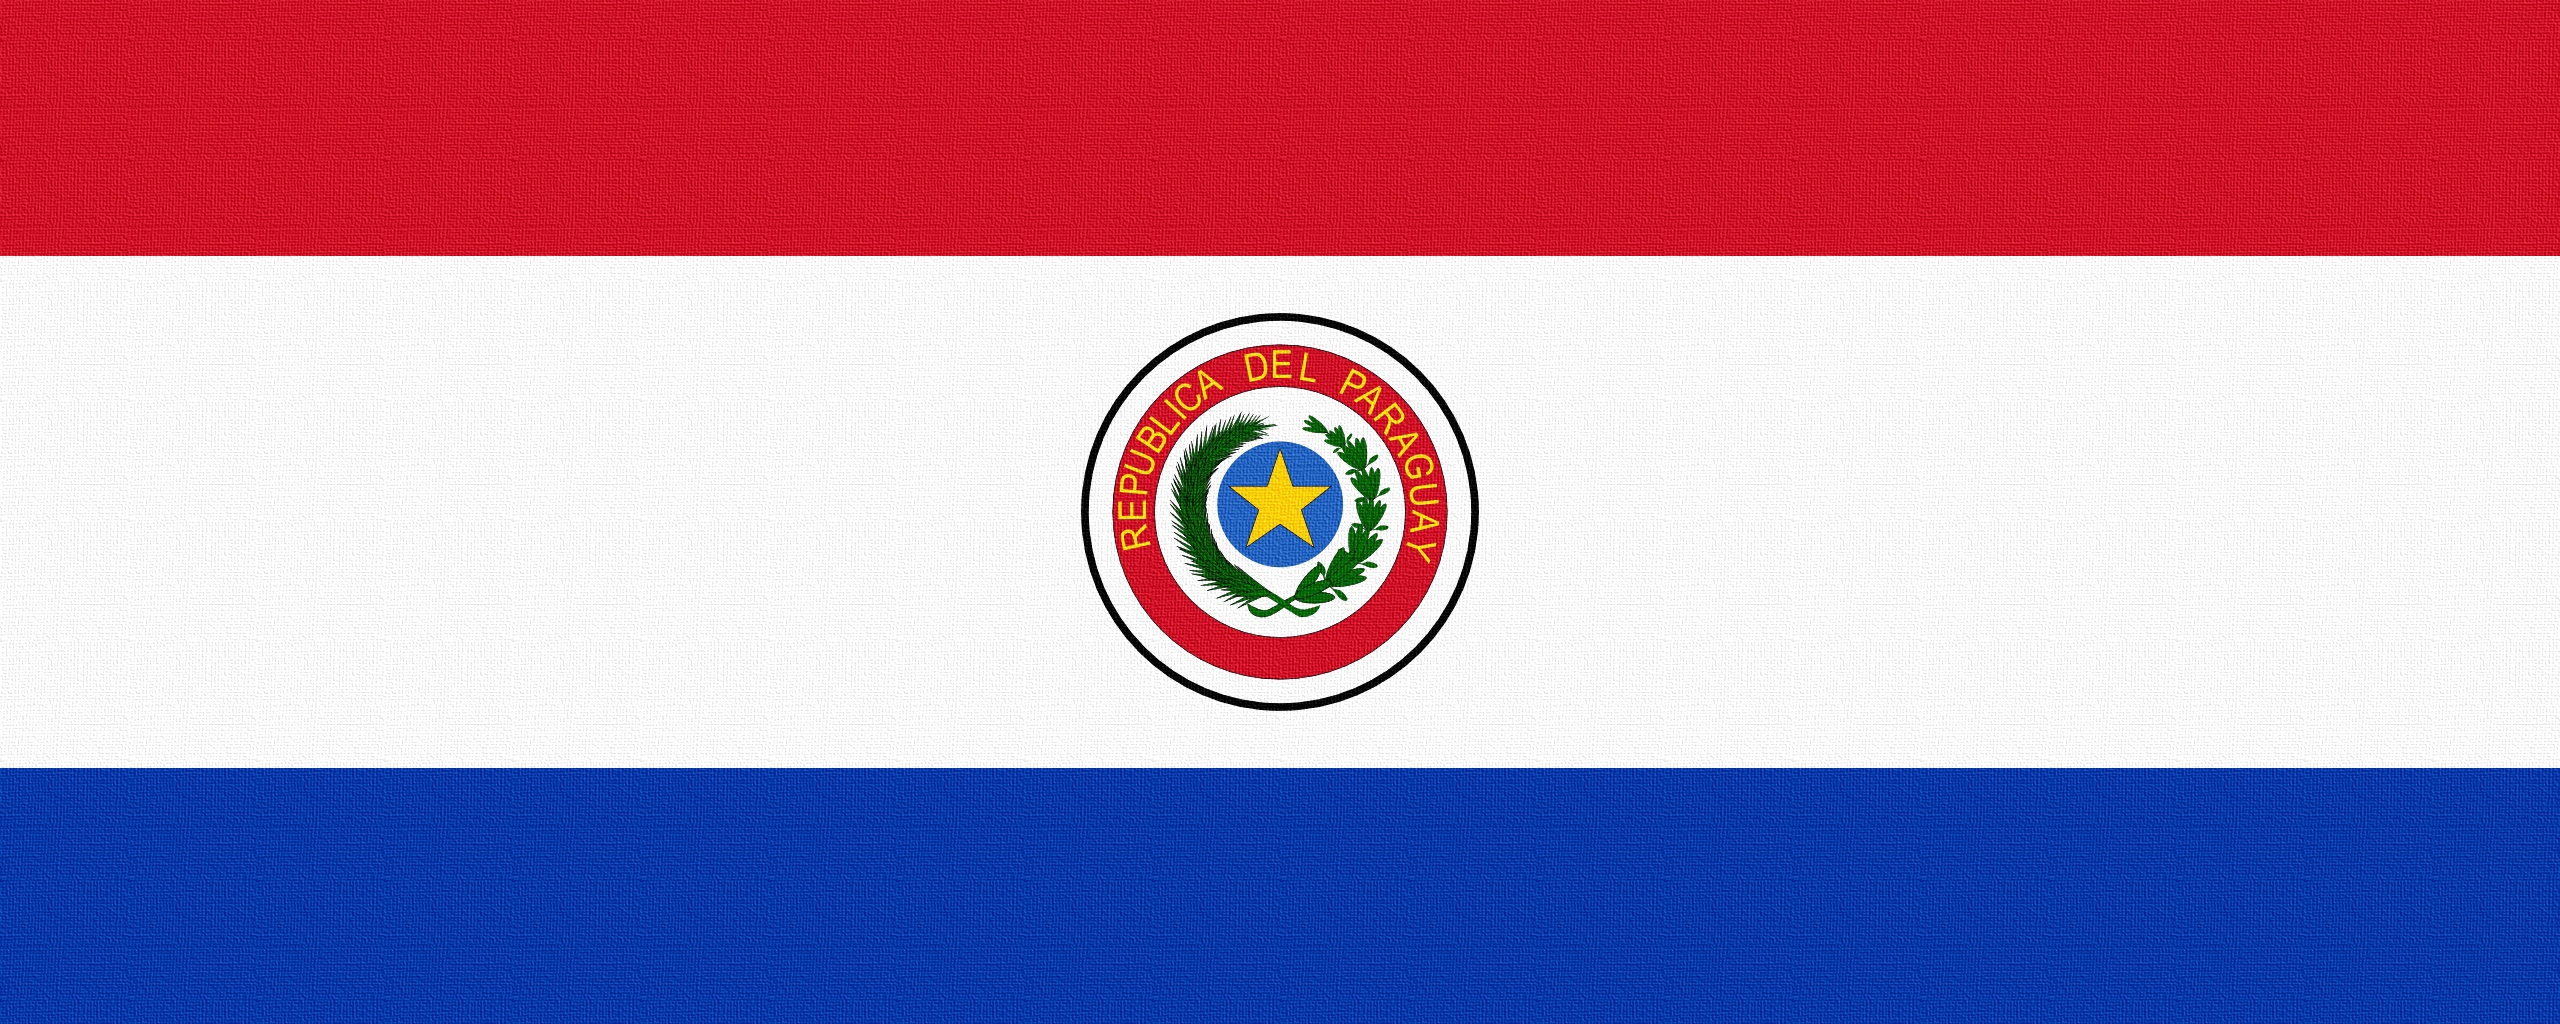 Download wallpaper 2560x1024 paraguay, flag, line ultrawide monitor